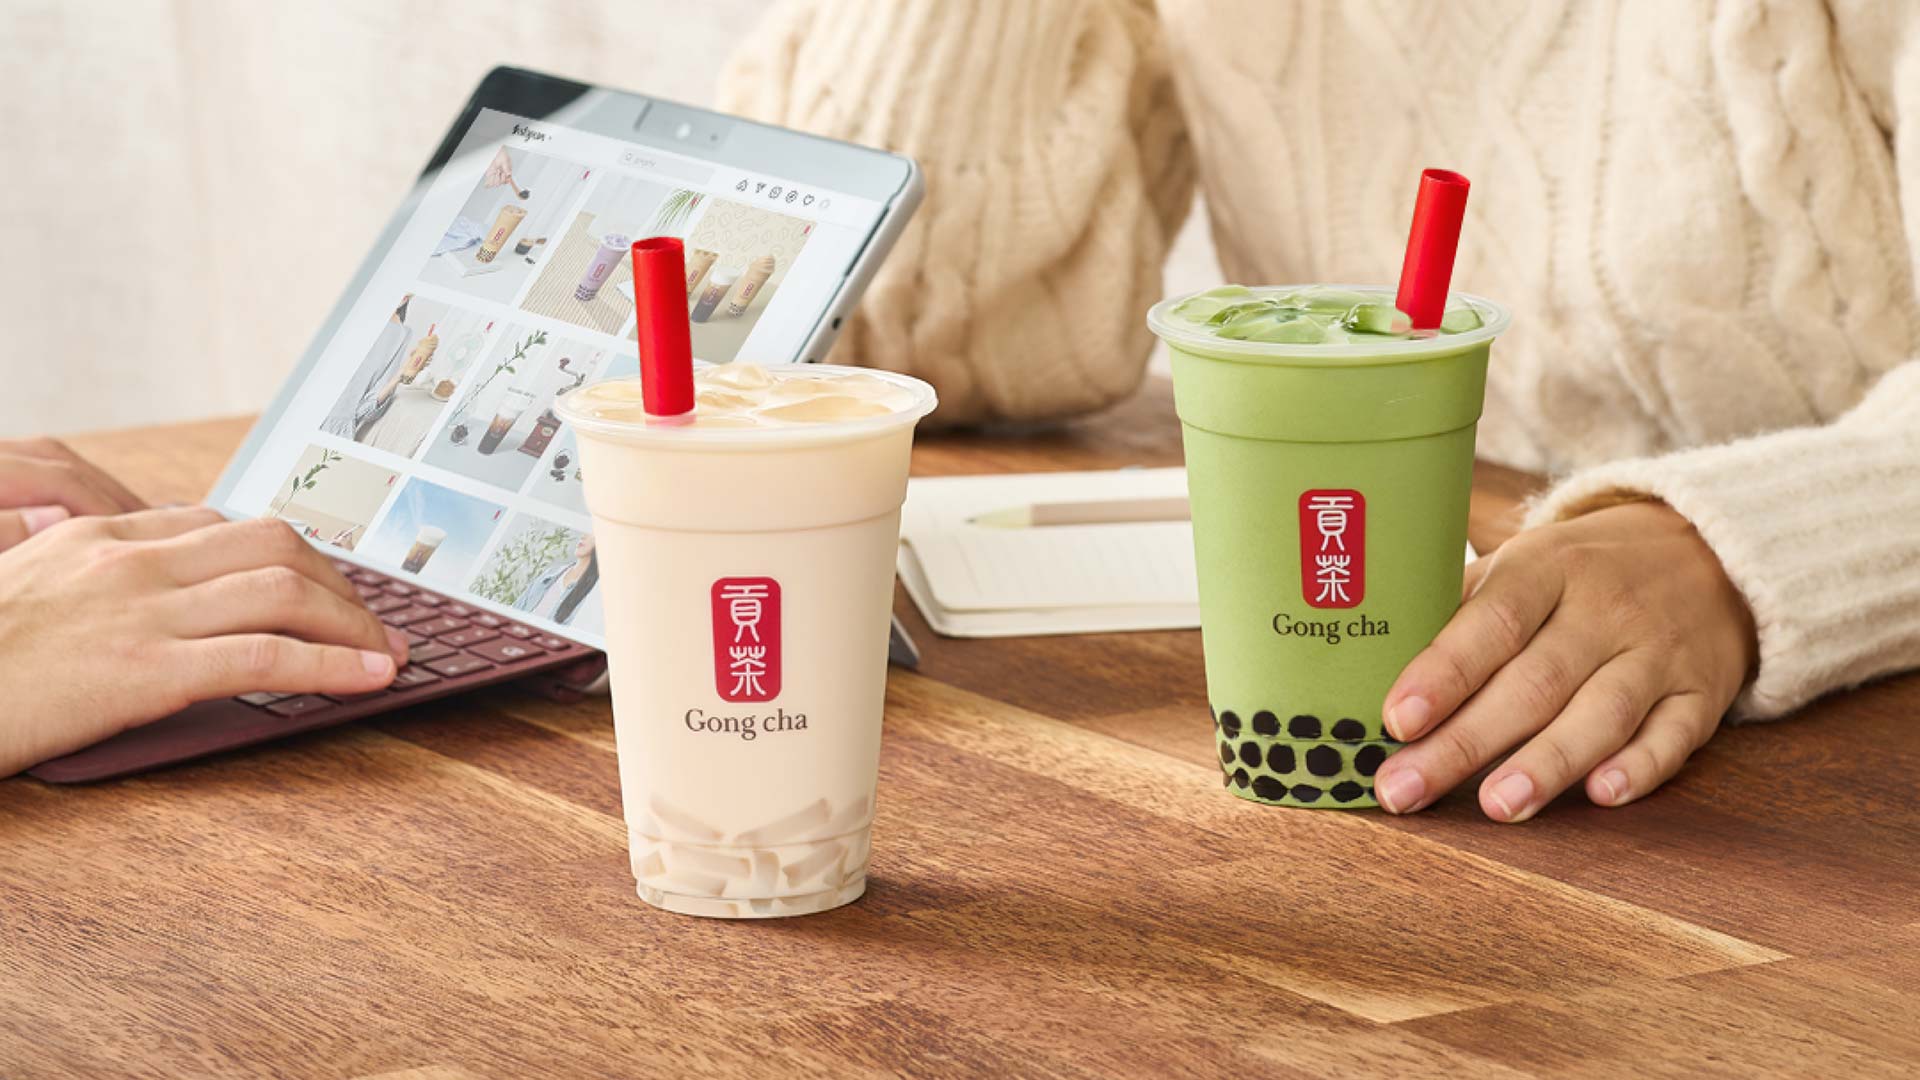 Gong cha drinks on table while browsing